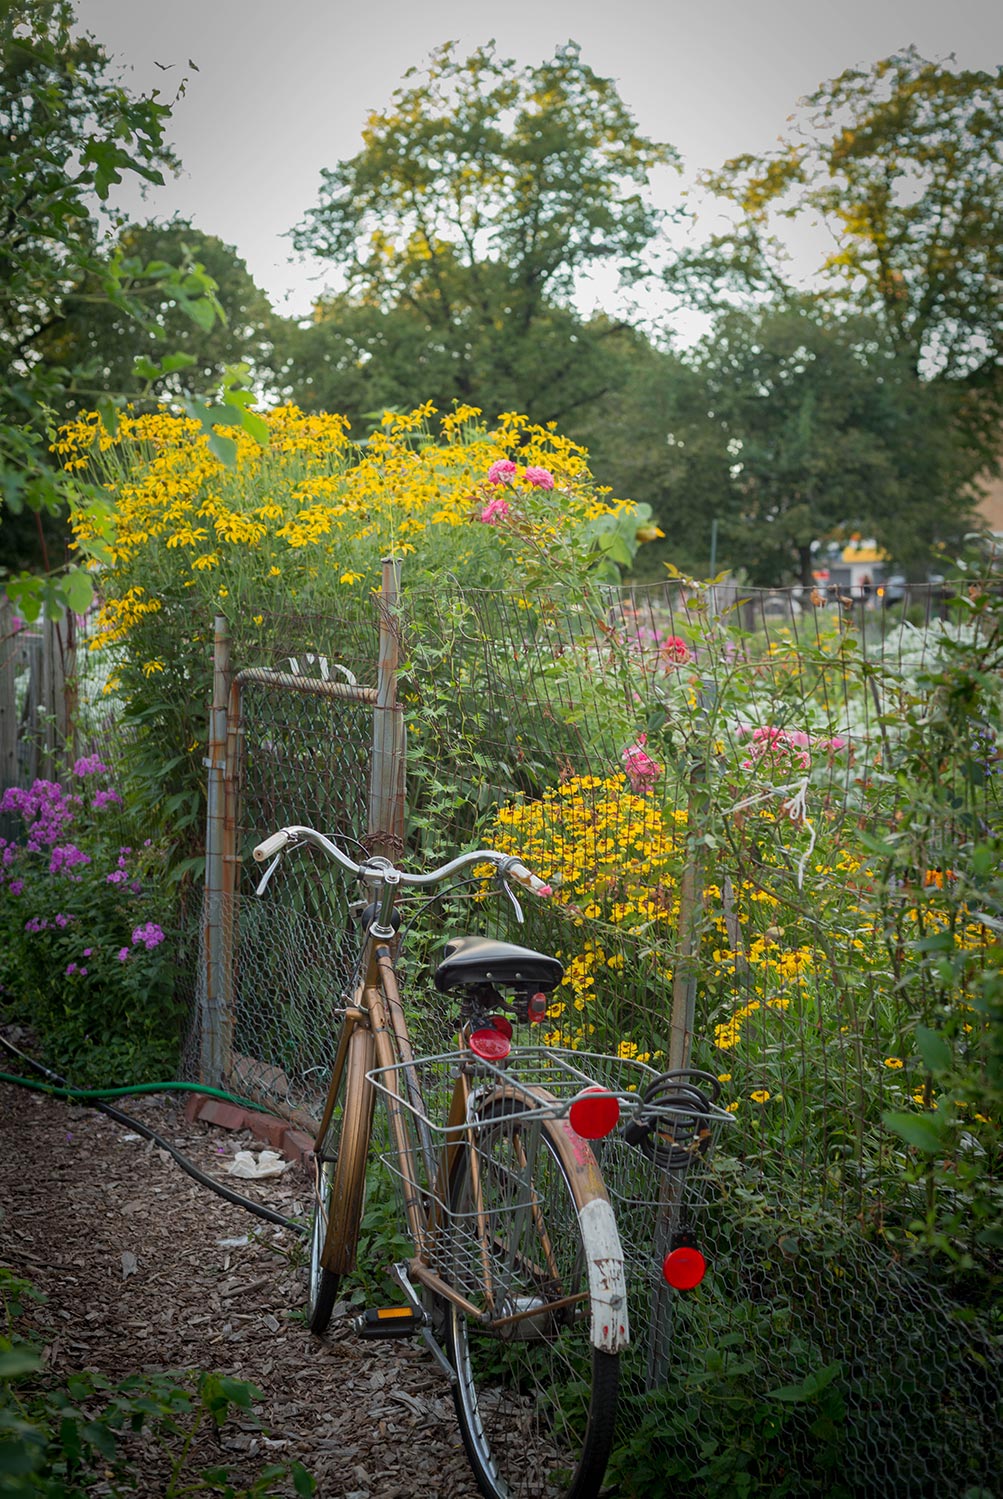 A bicycle leaning against a fence in a garden.